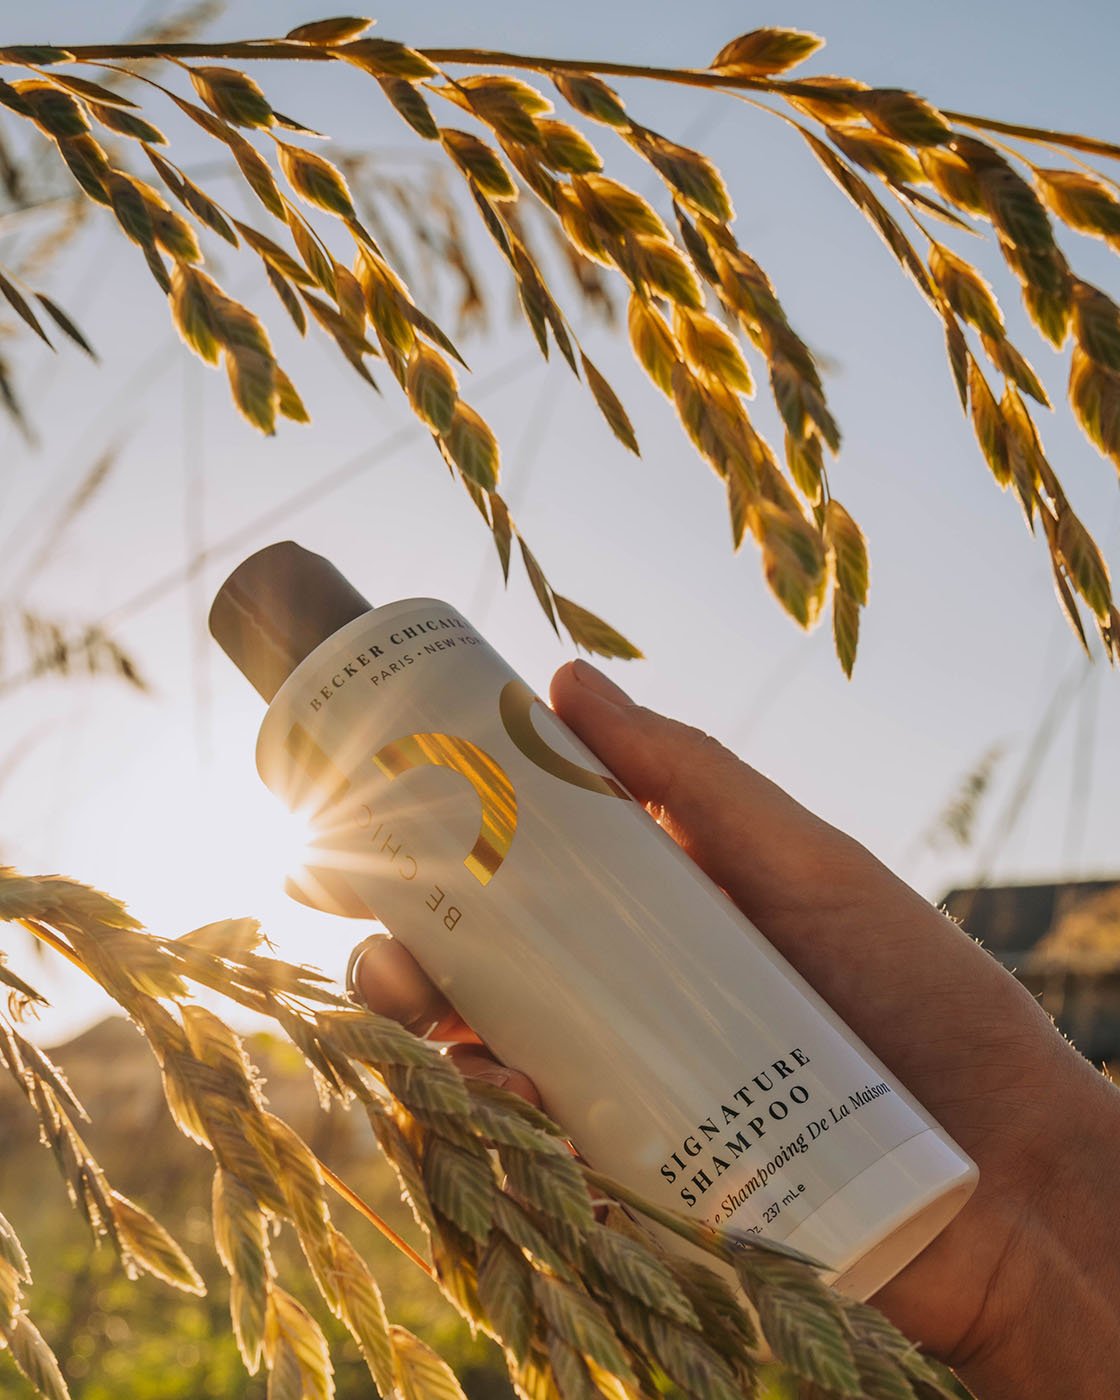 Be Chic Signature Shampoo shot in a hazy sunlit pasture by Chad Savage